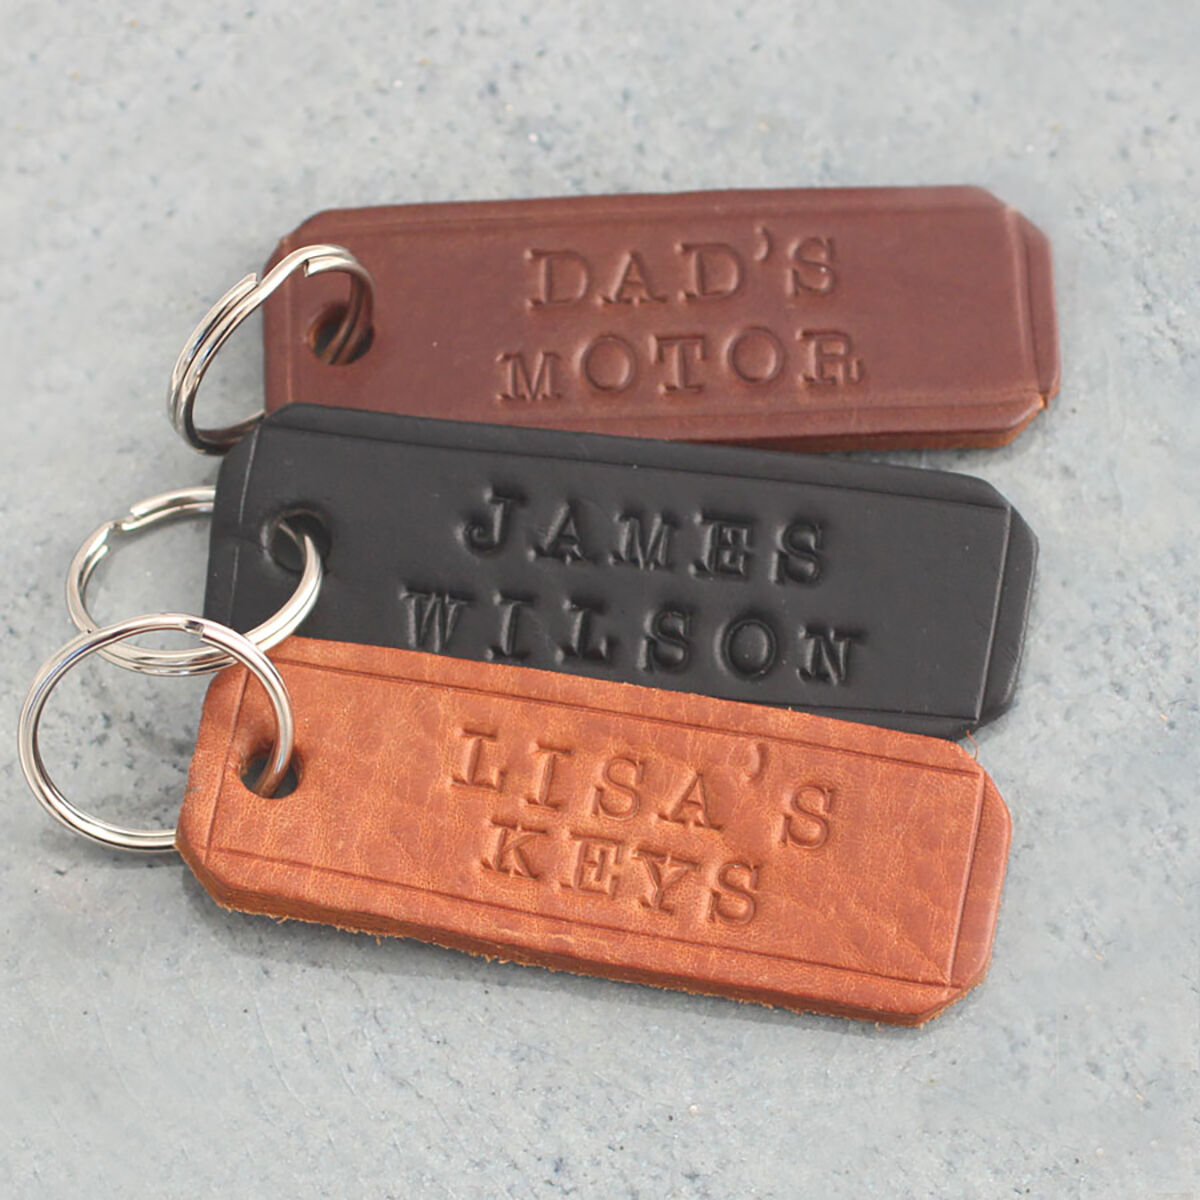 Fancy Up Your Keyrings - J.H. Leather